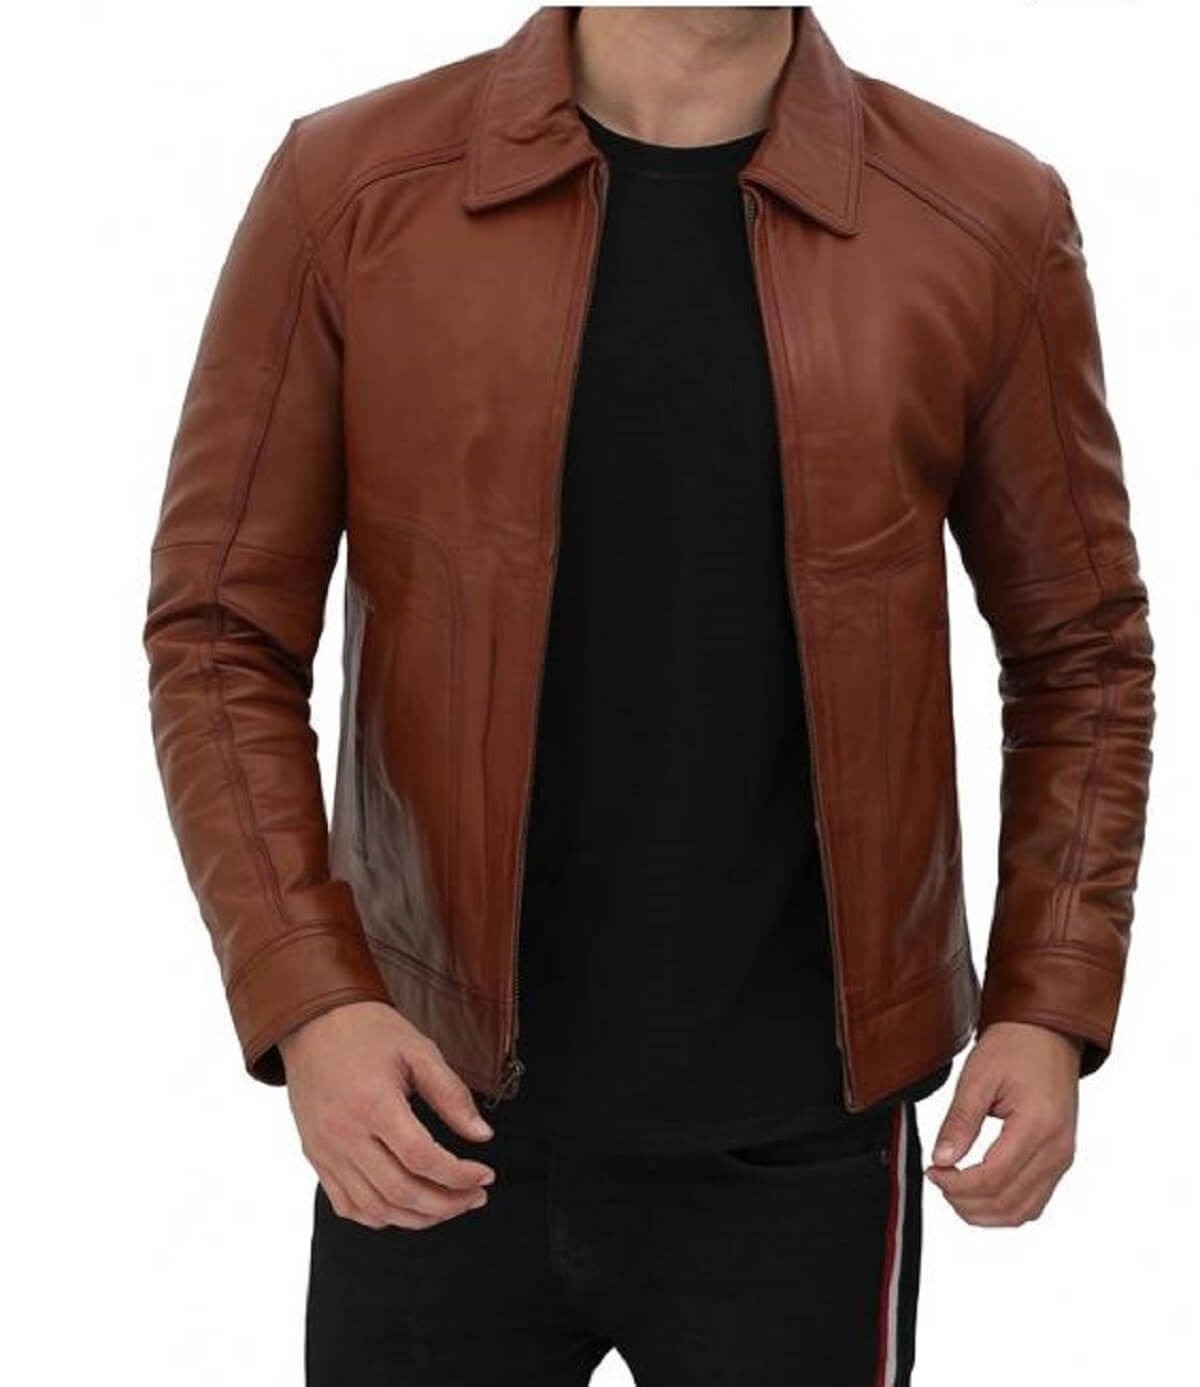 Men's John Wick Brown Leather Jacket - Leather Store